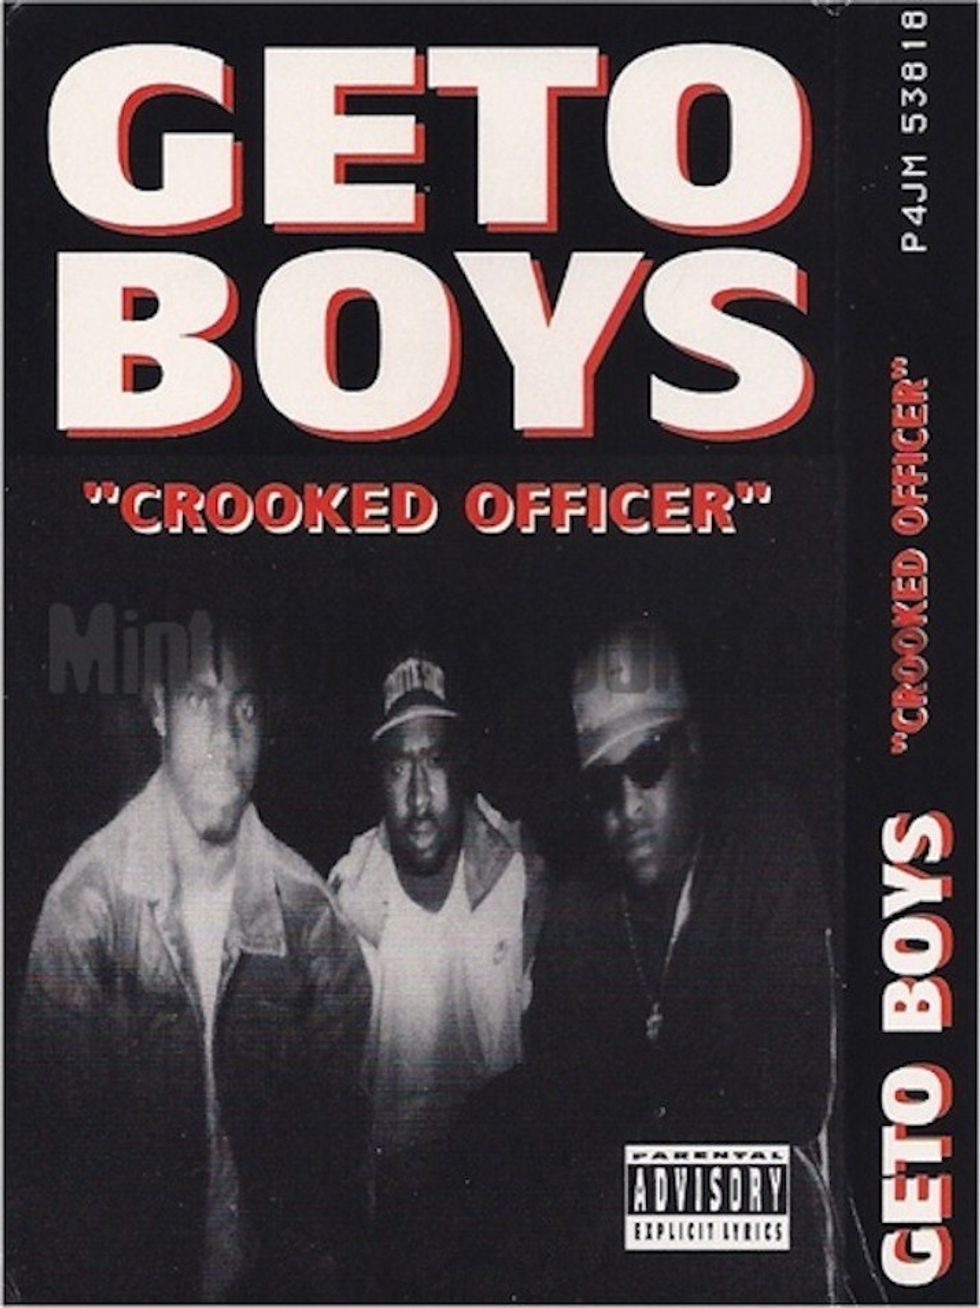 Geto boys crooked officer 1